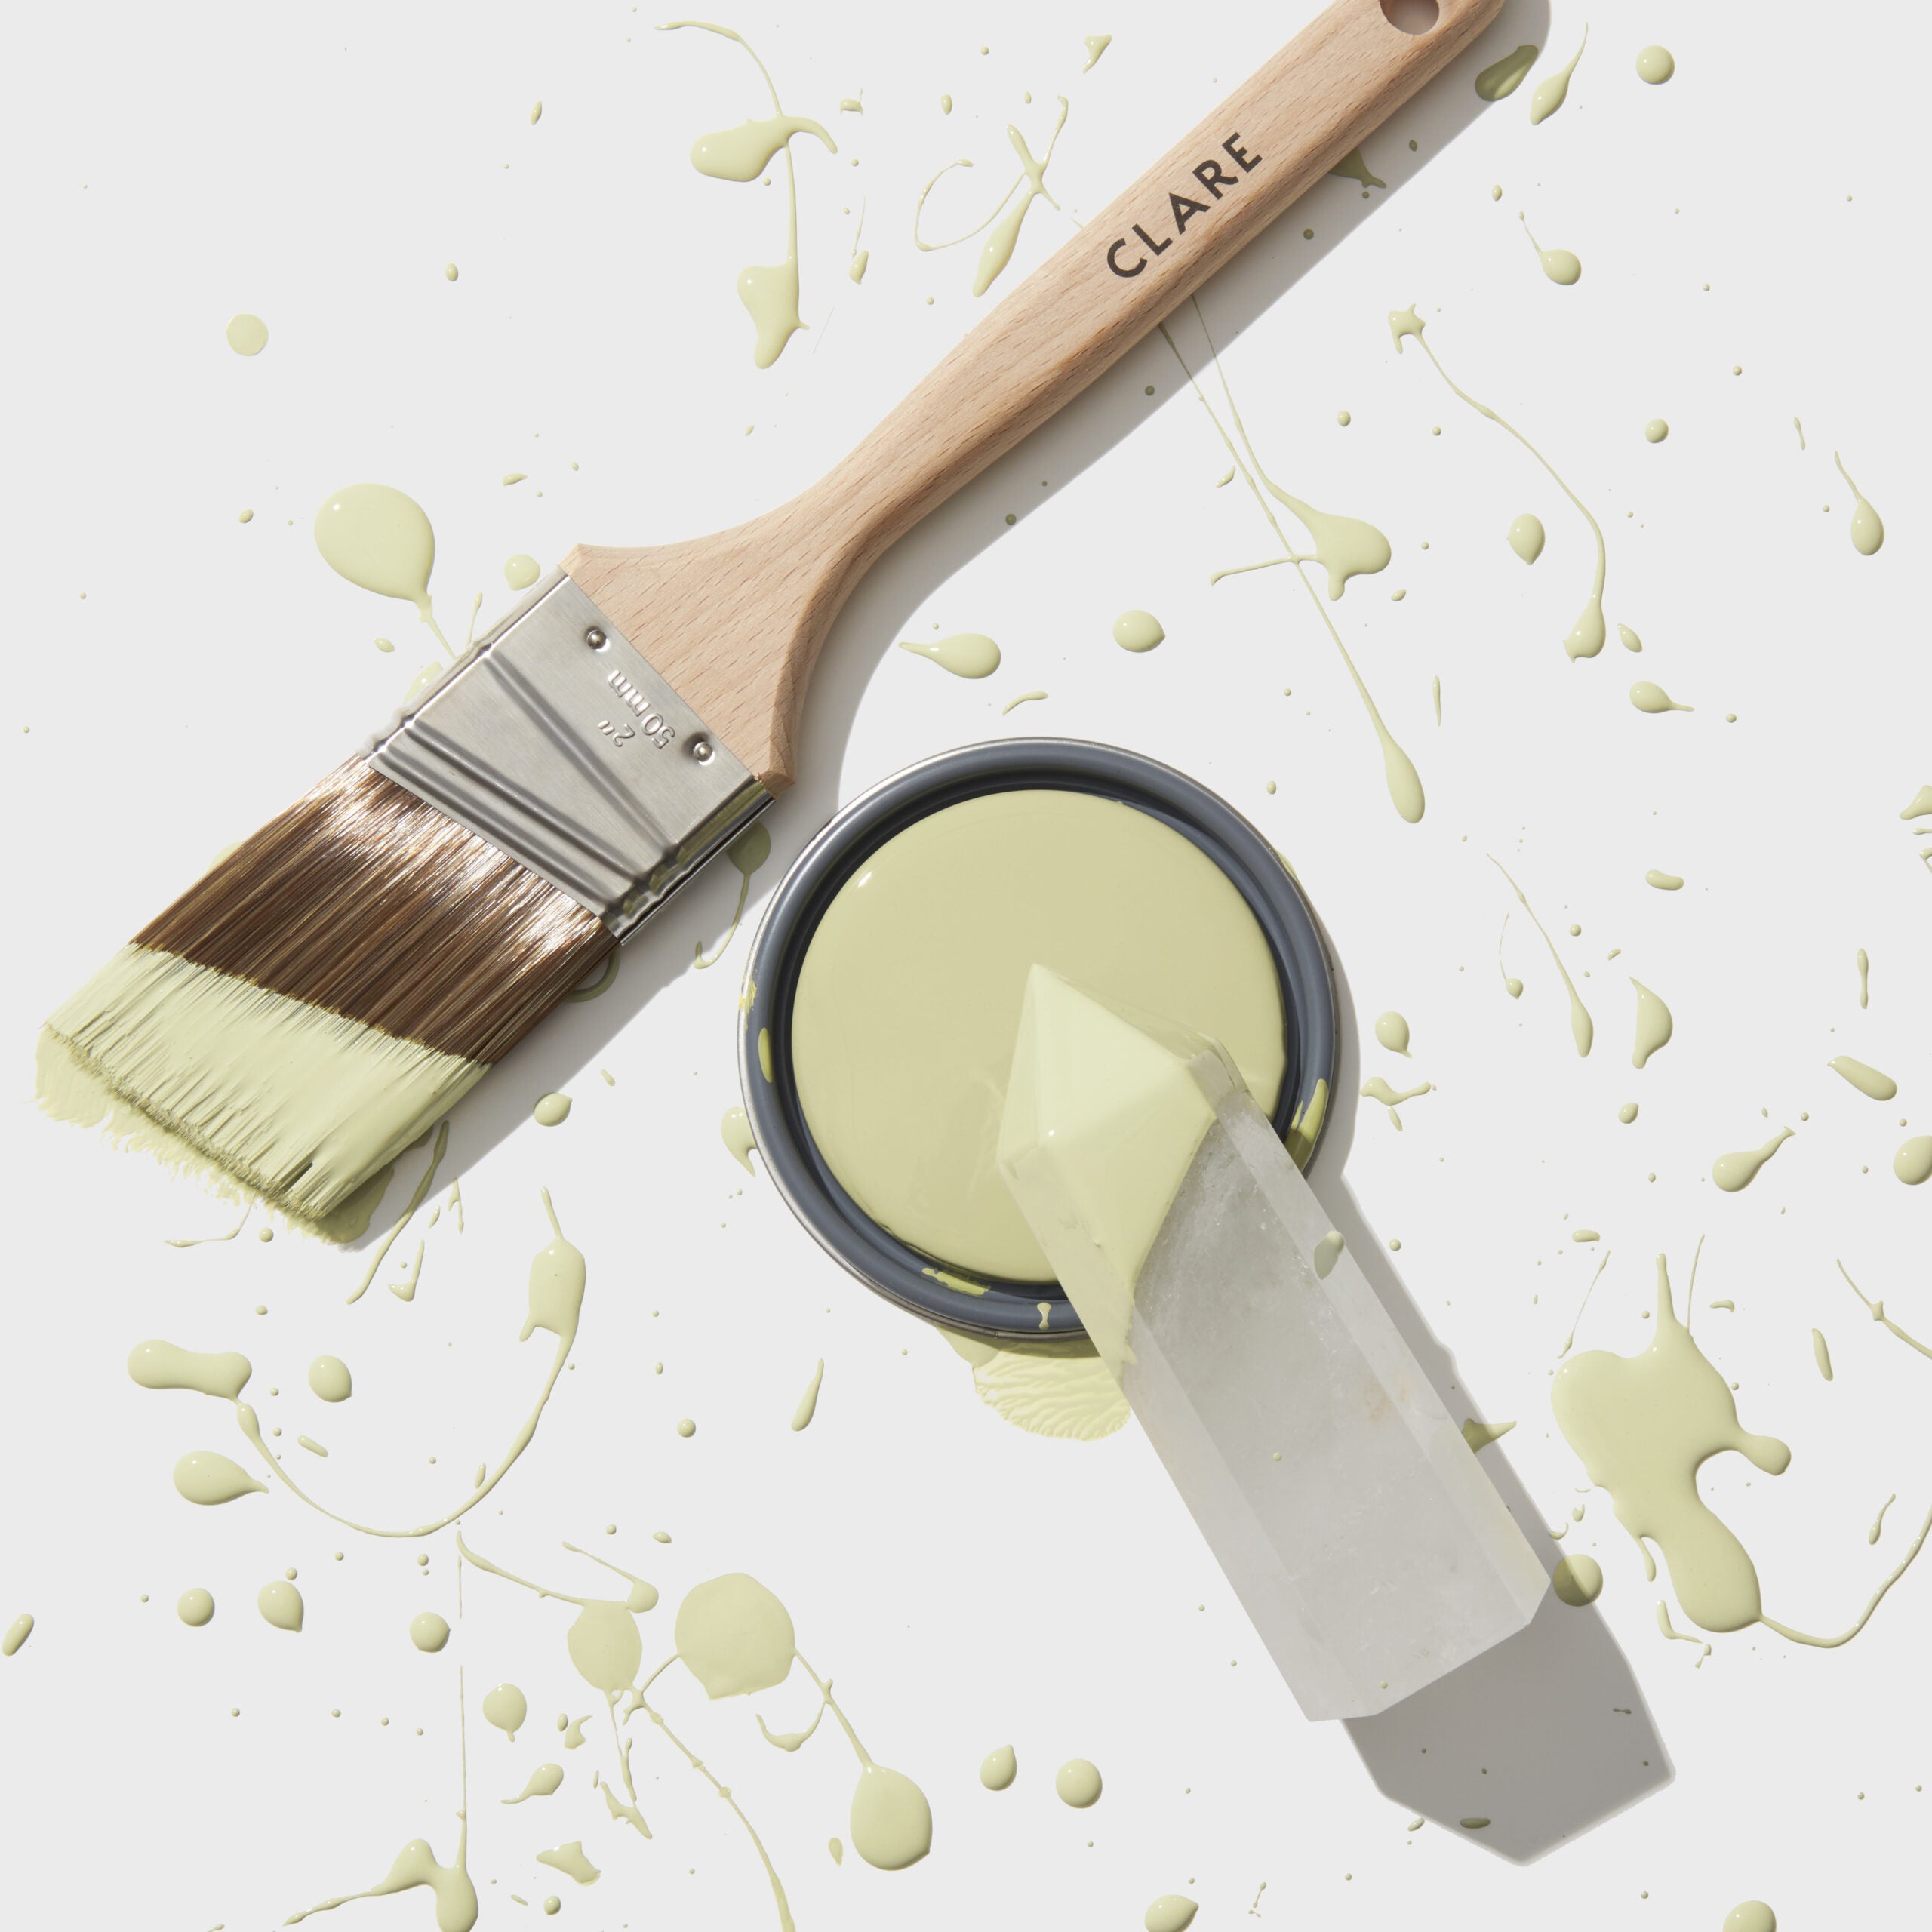 Sage Green Isn’t Going Anywhere, But Clare’s New Shade Proves Change Is Coming